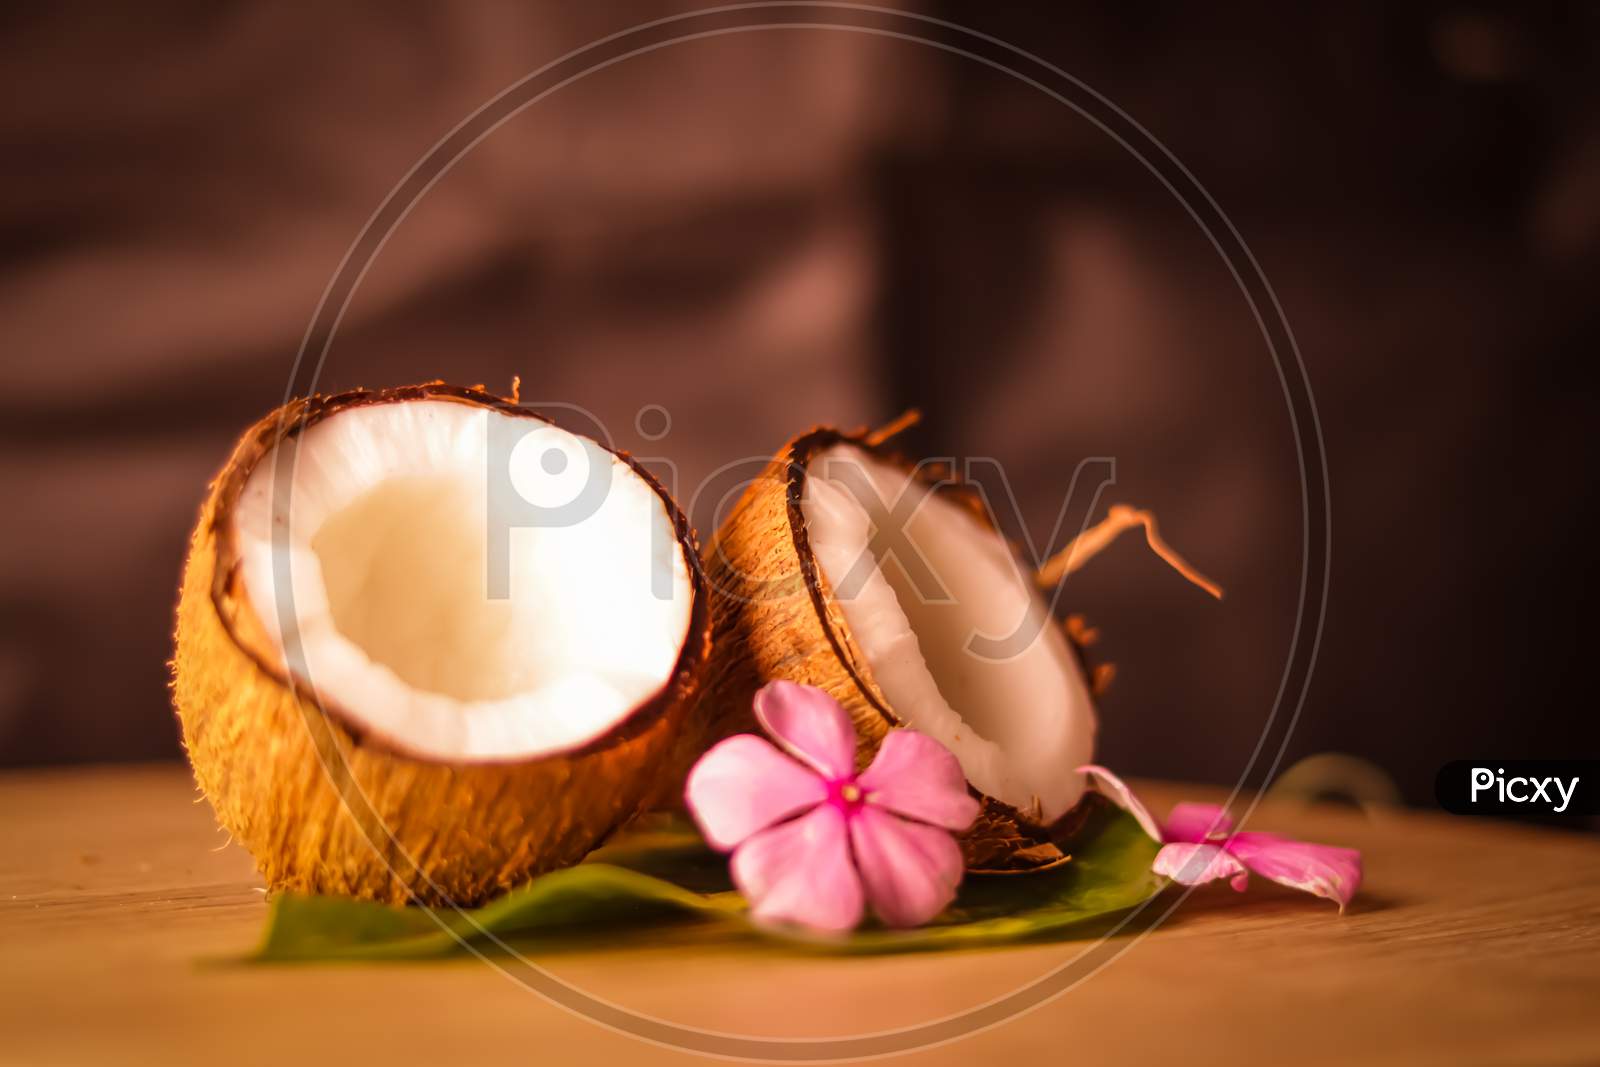 Healthy Coconut Milk With Whole Nut And Pieces,Coconut Powder And And Whole Coconut Hd Footage,,Selective Focus On Subject,